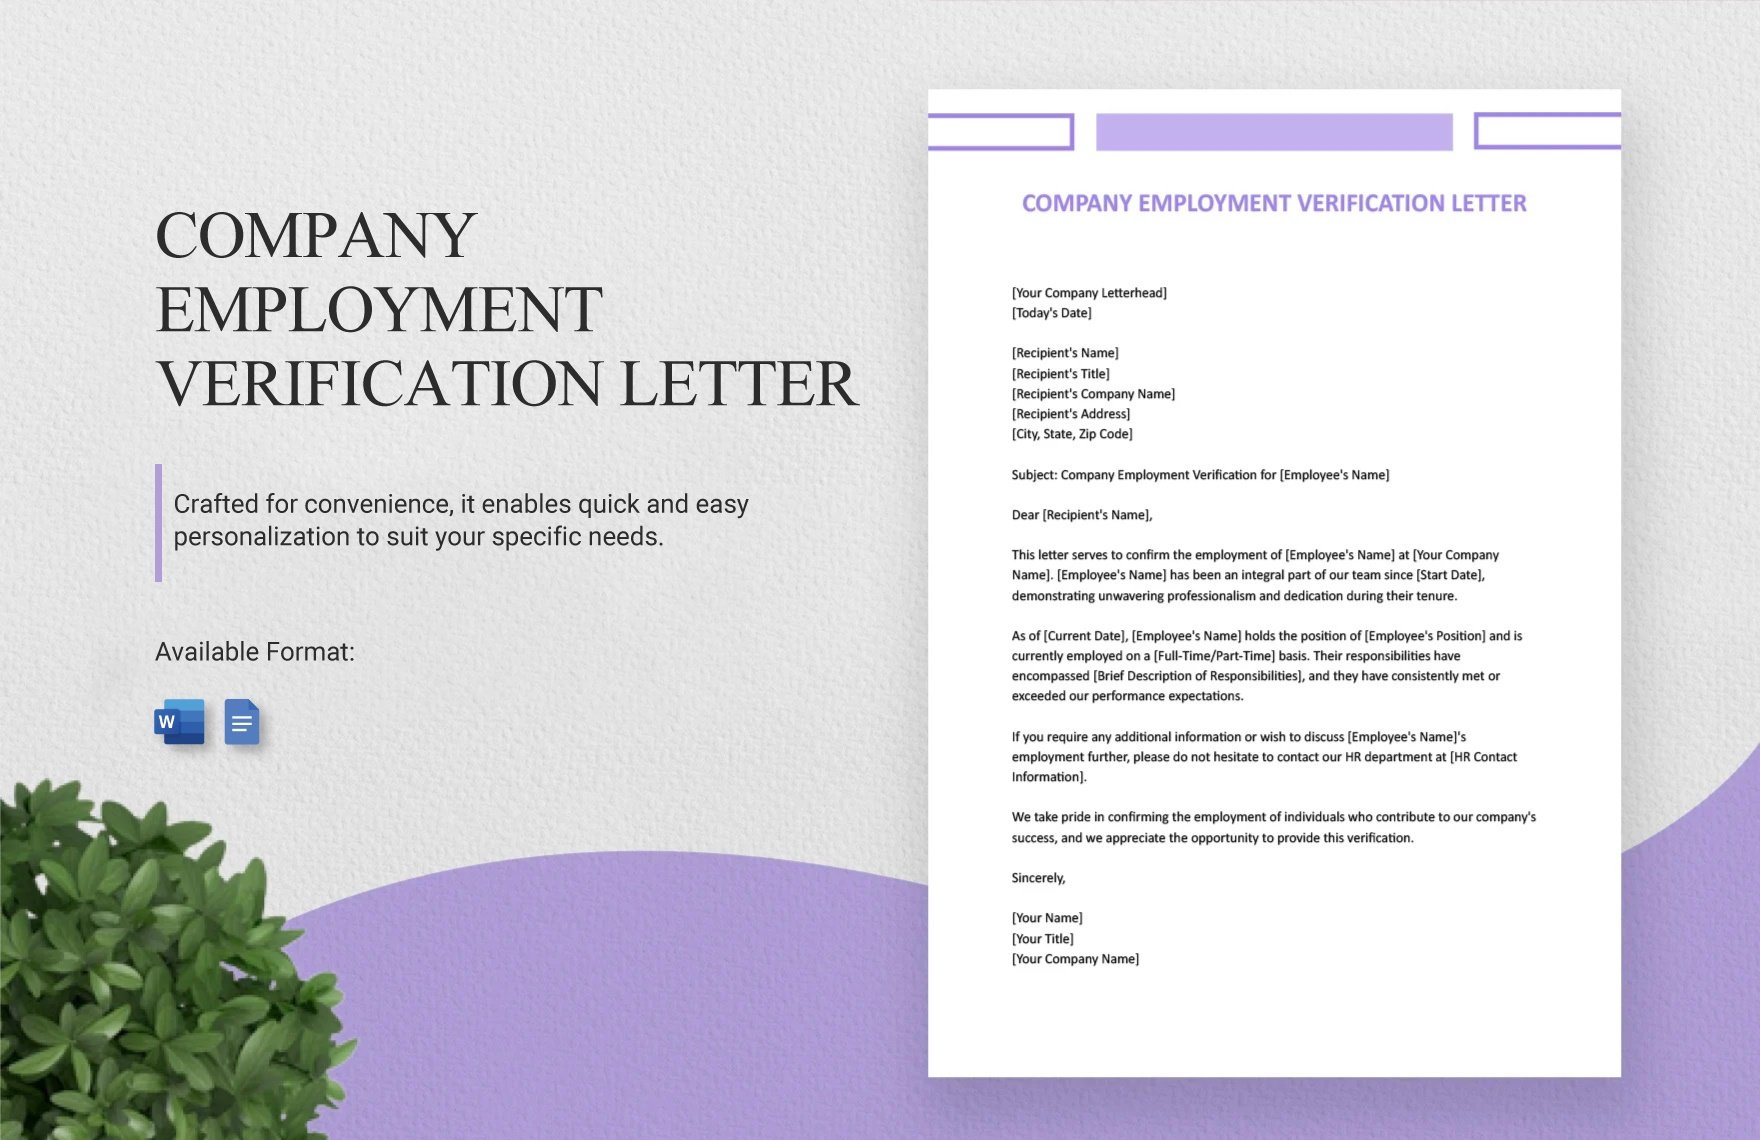 Free Company Employment Verification Letter in Word, Google Docs